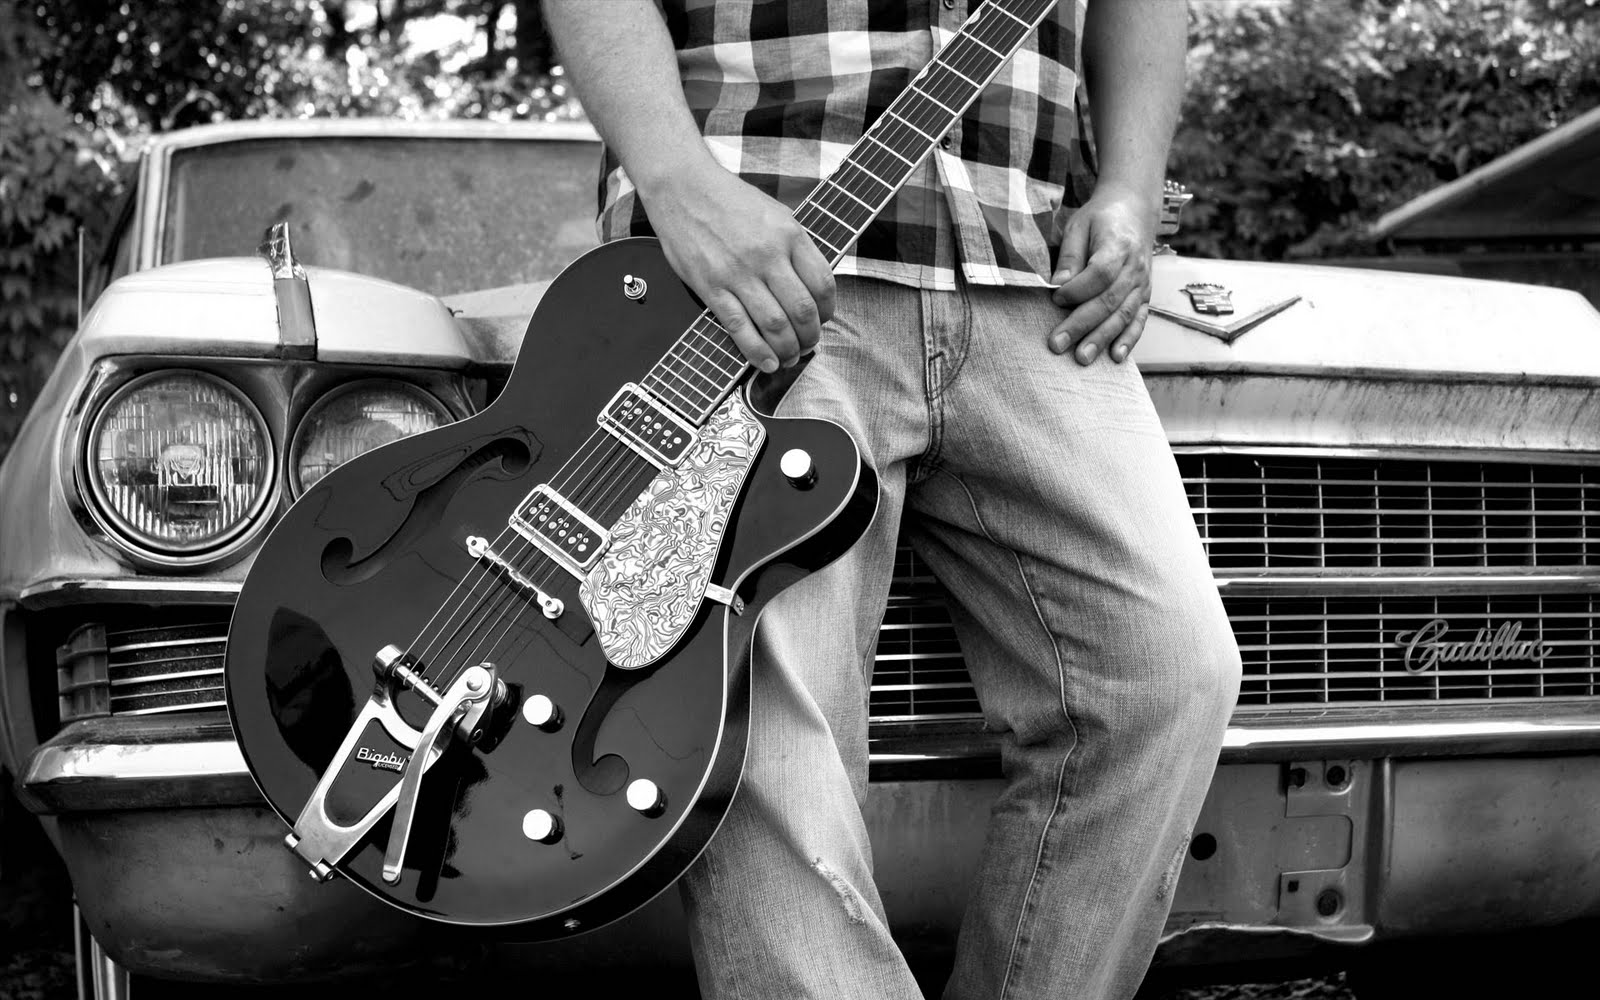 Guitar Wallpaper   Gretsch Bigsby Electric Guitar Infront of Cadillac